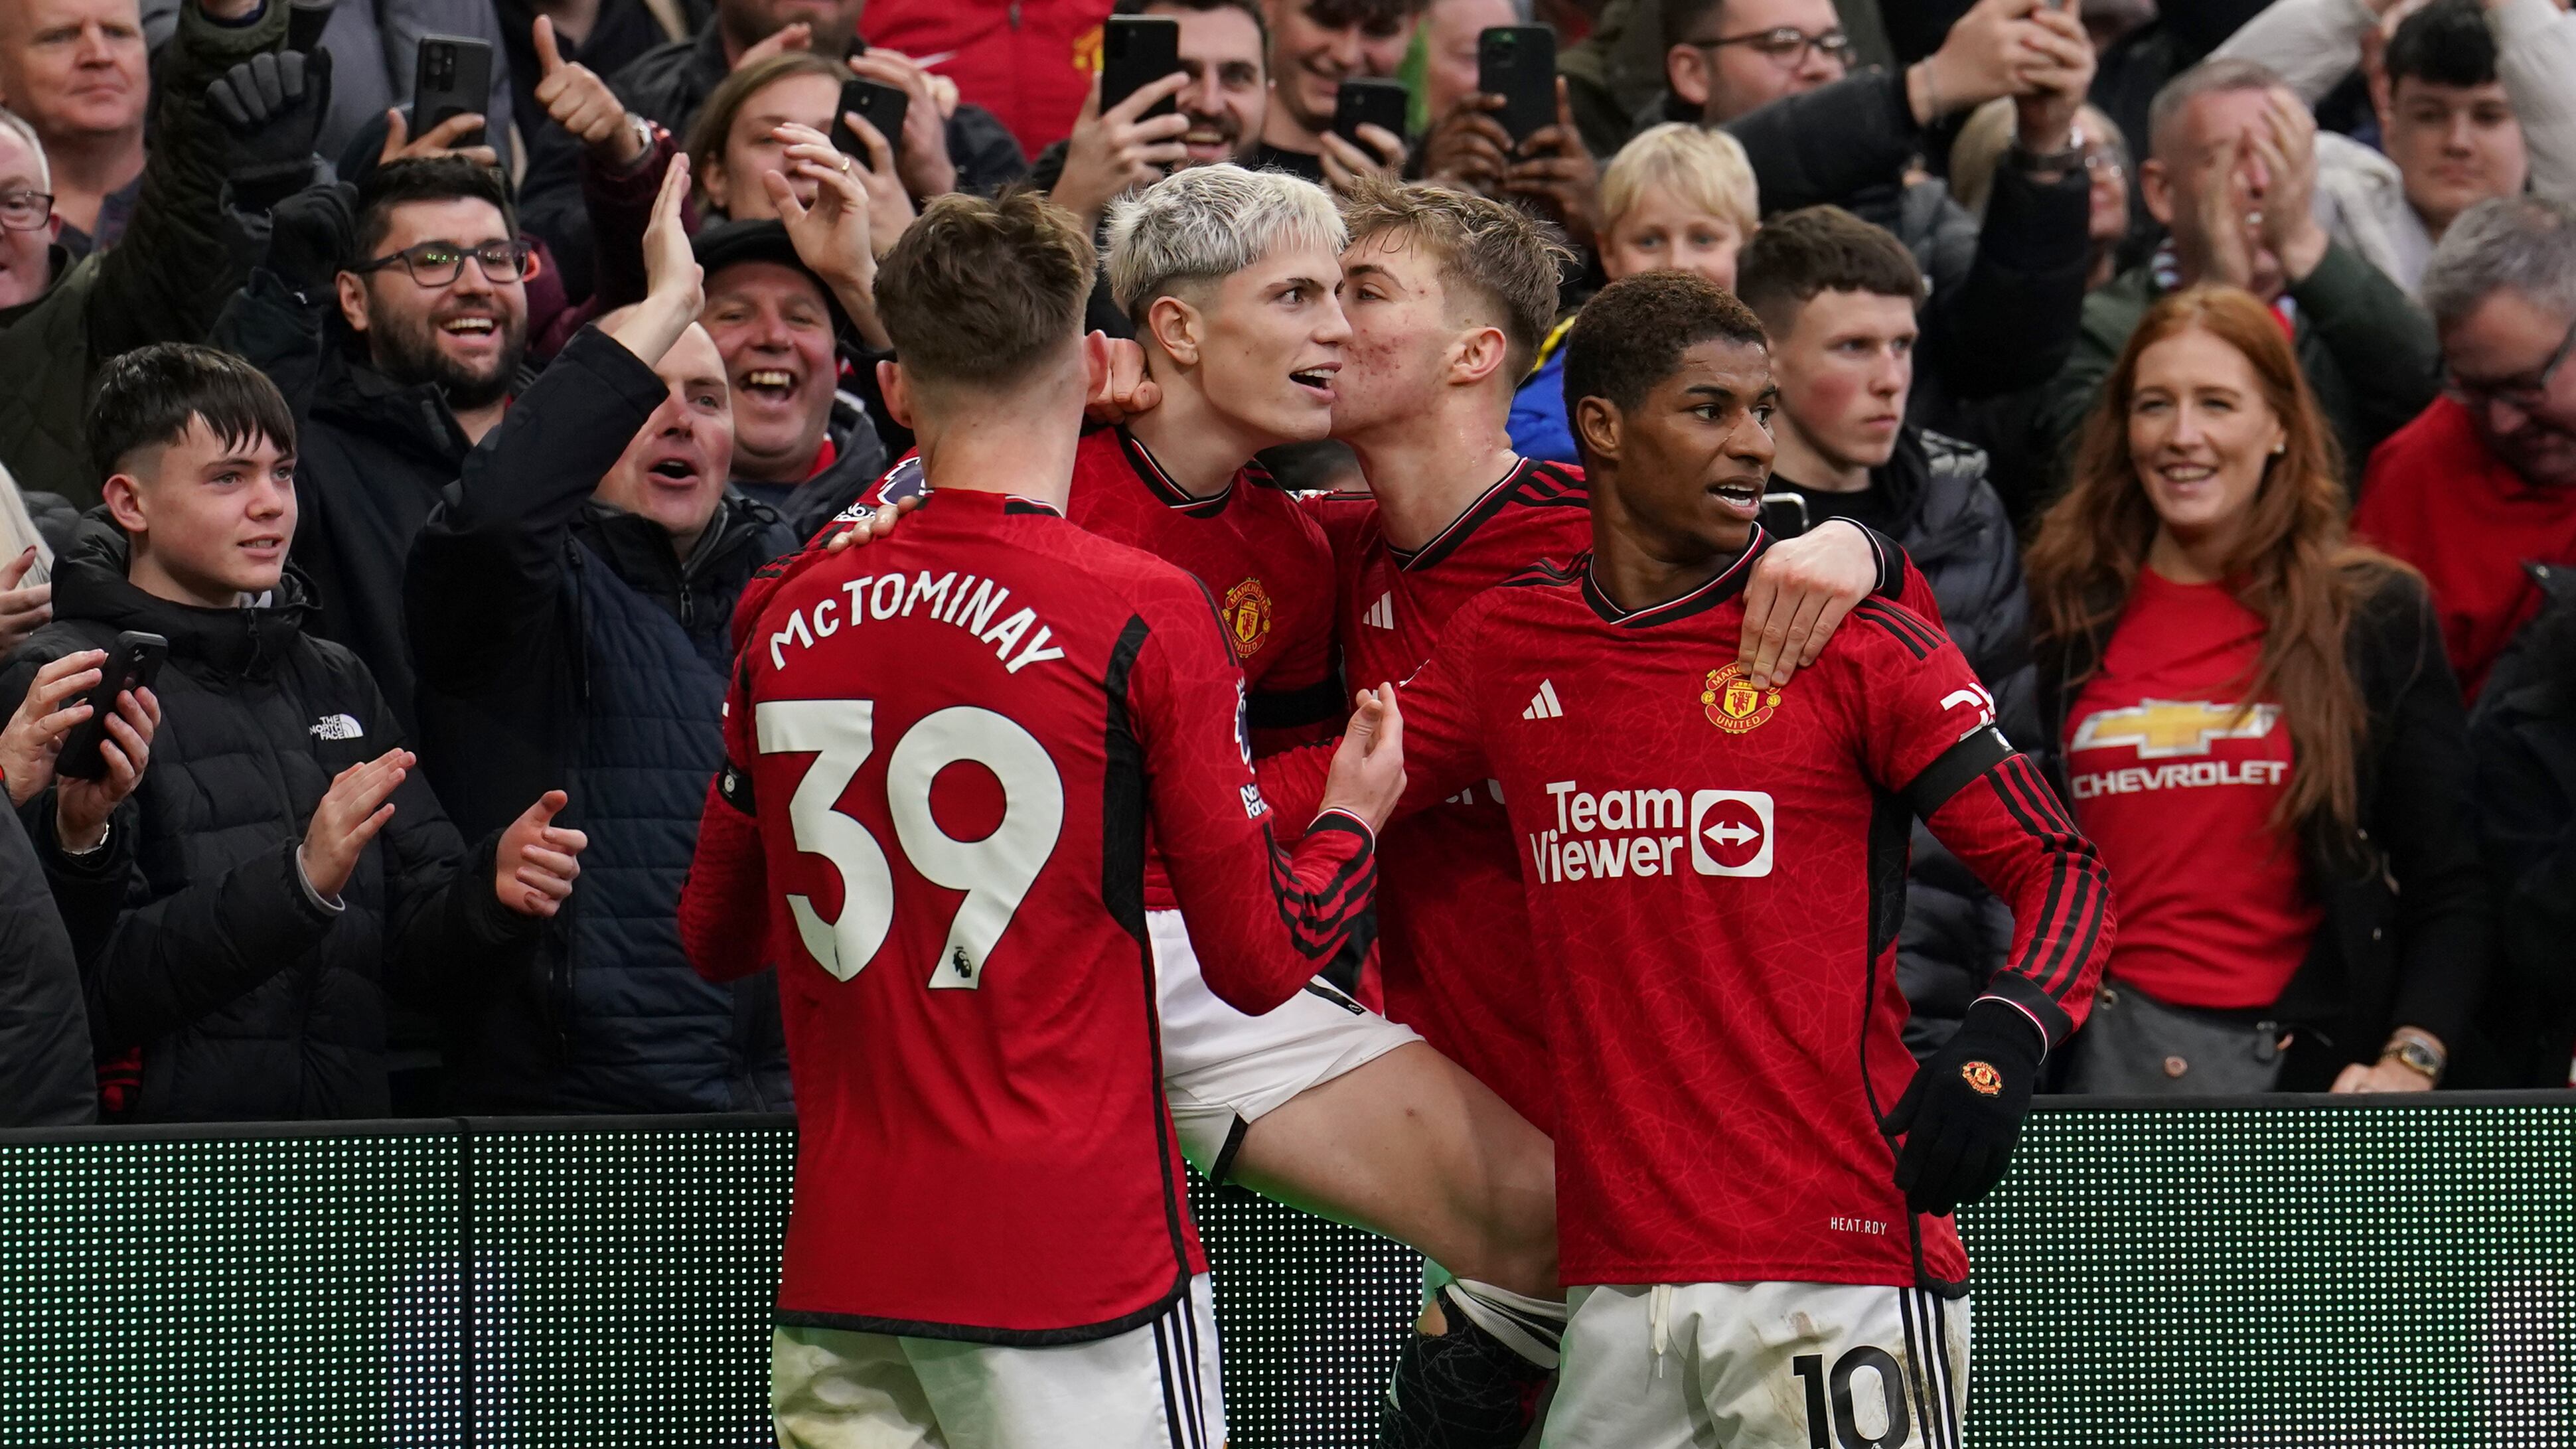 Scott McTominay, left, Alejandro Garnacho, second left, and Marcus Rashford, right, were among Manchester United’s academy contingent